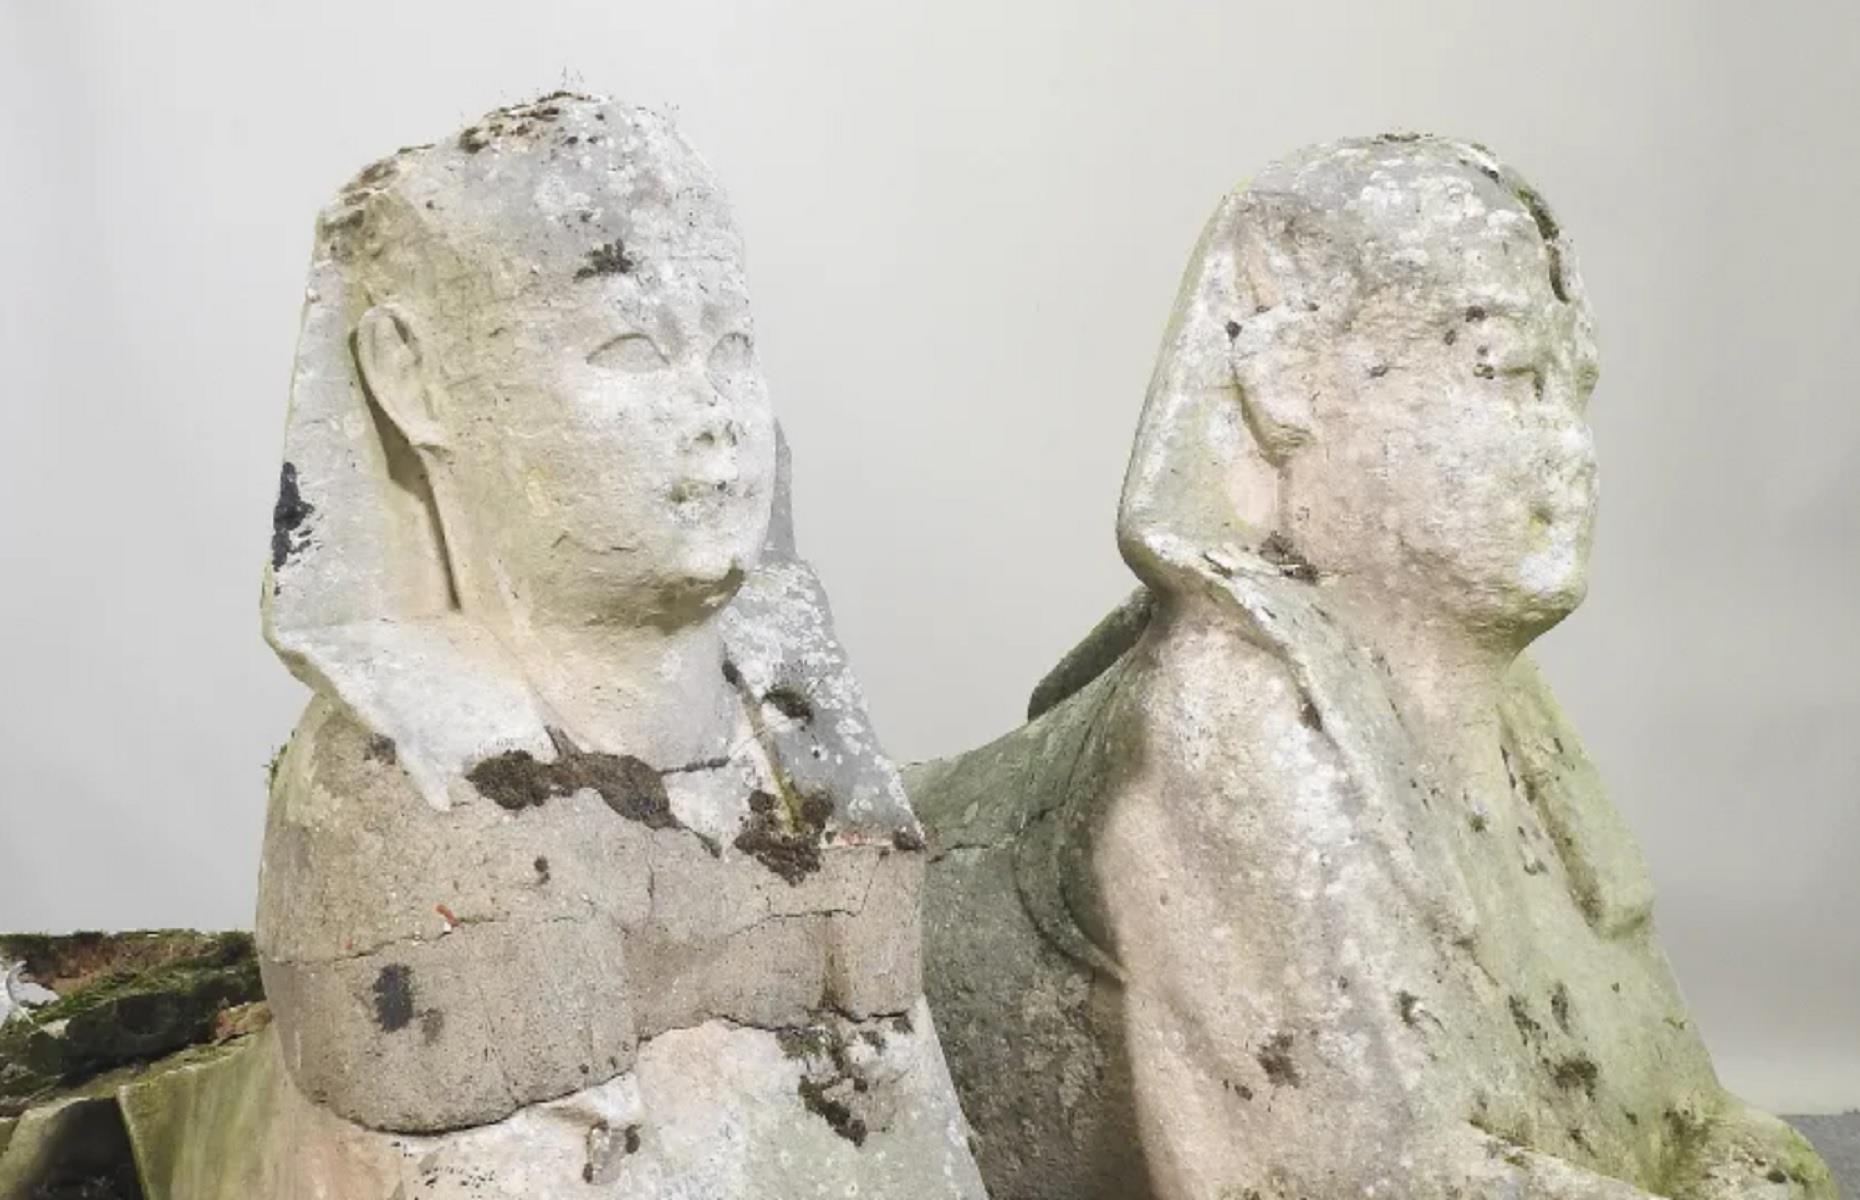 The Ancient Egyptian sphinxes in an English garden: $265,000 (£195k)